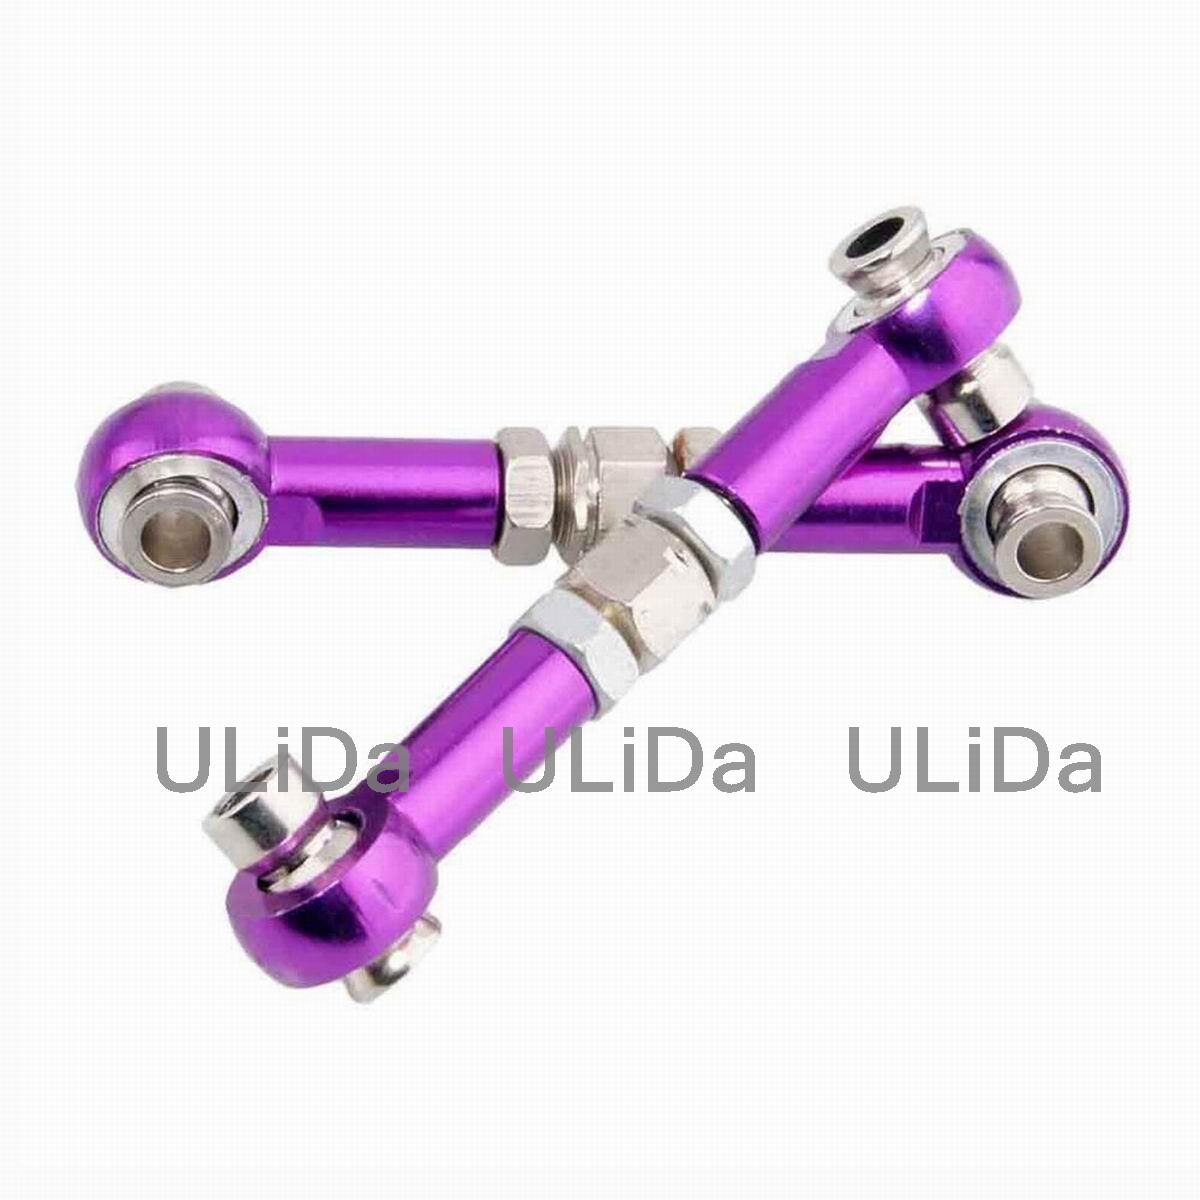 102017/122017 Linkages Sonic Steering 02157/02012 RC Car for HSP Redcat 1/10